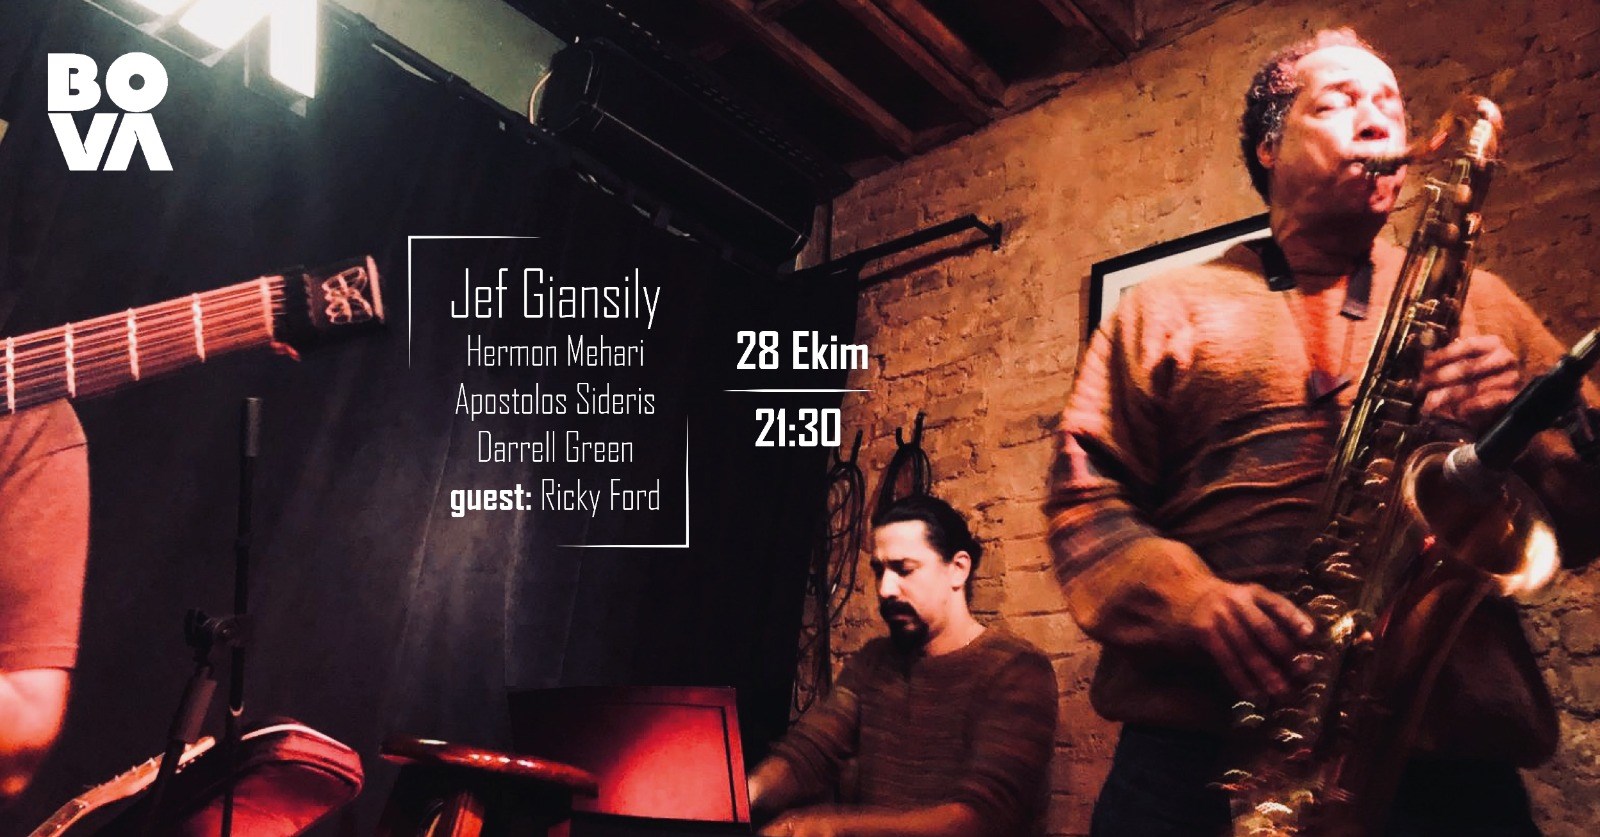 Giansily & Mehari & Sideris & Green guest: Ricky Ford